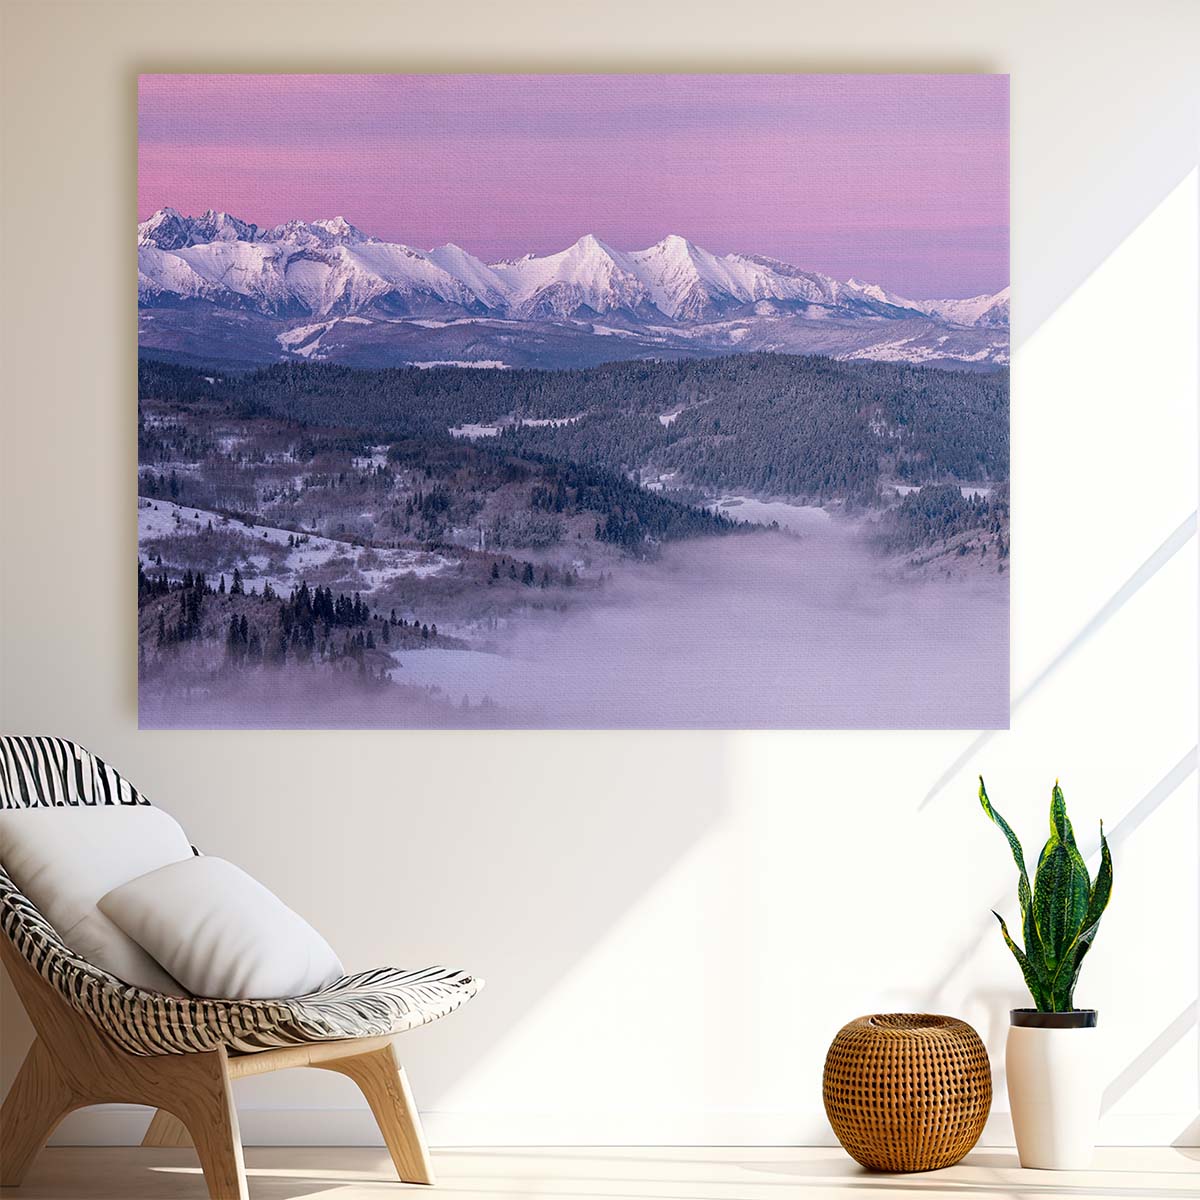 Misty Dawn in Snowy Tatra Mountains Panoramic Wall Art by Luxuriance Designs. Made in USA.